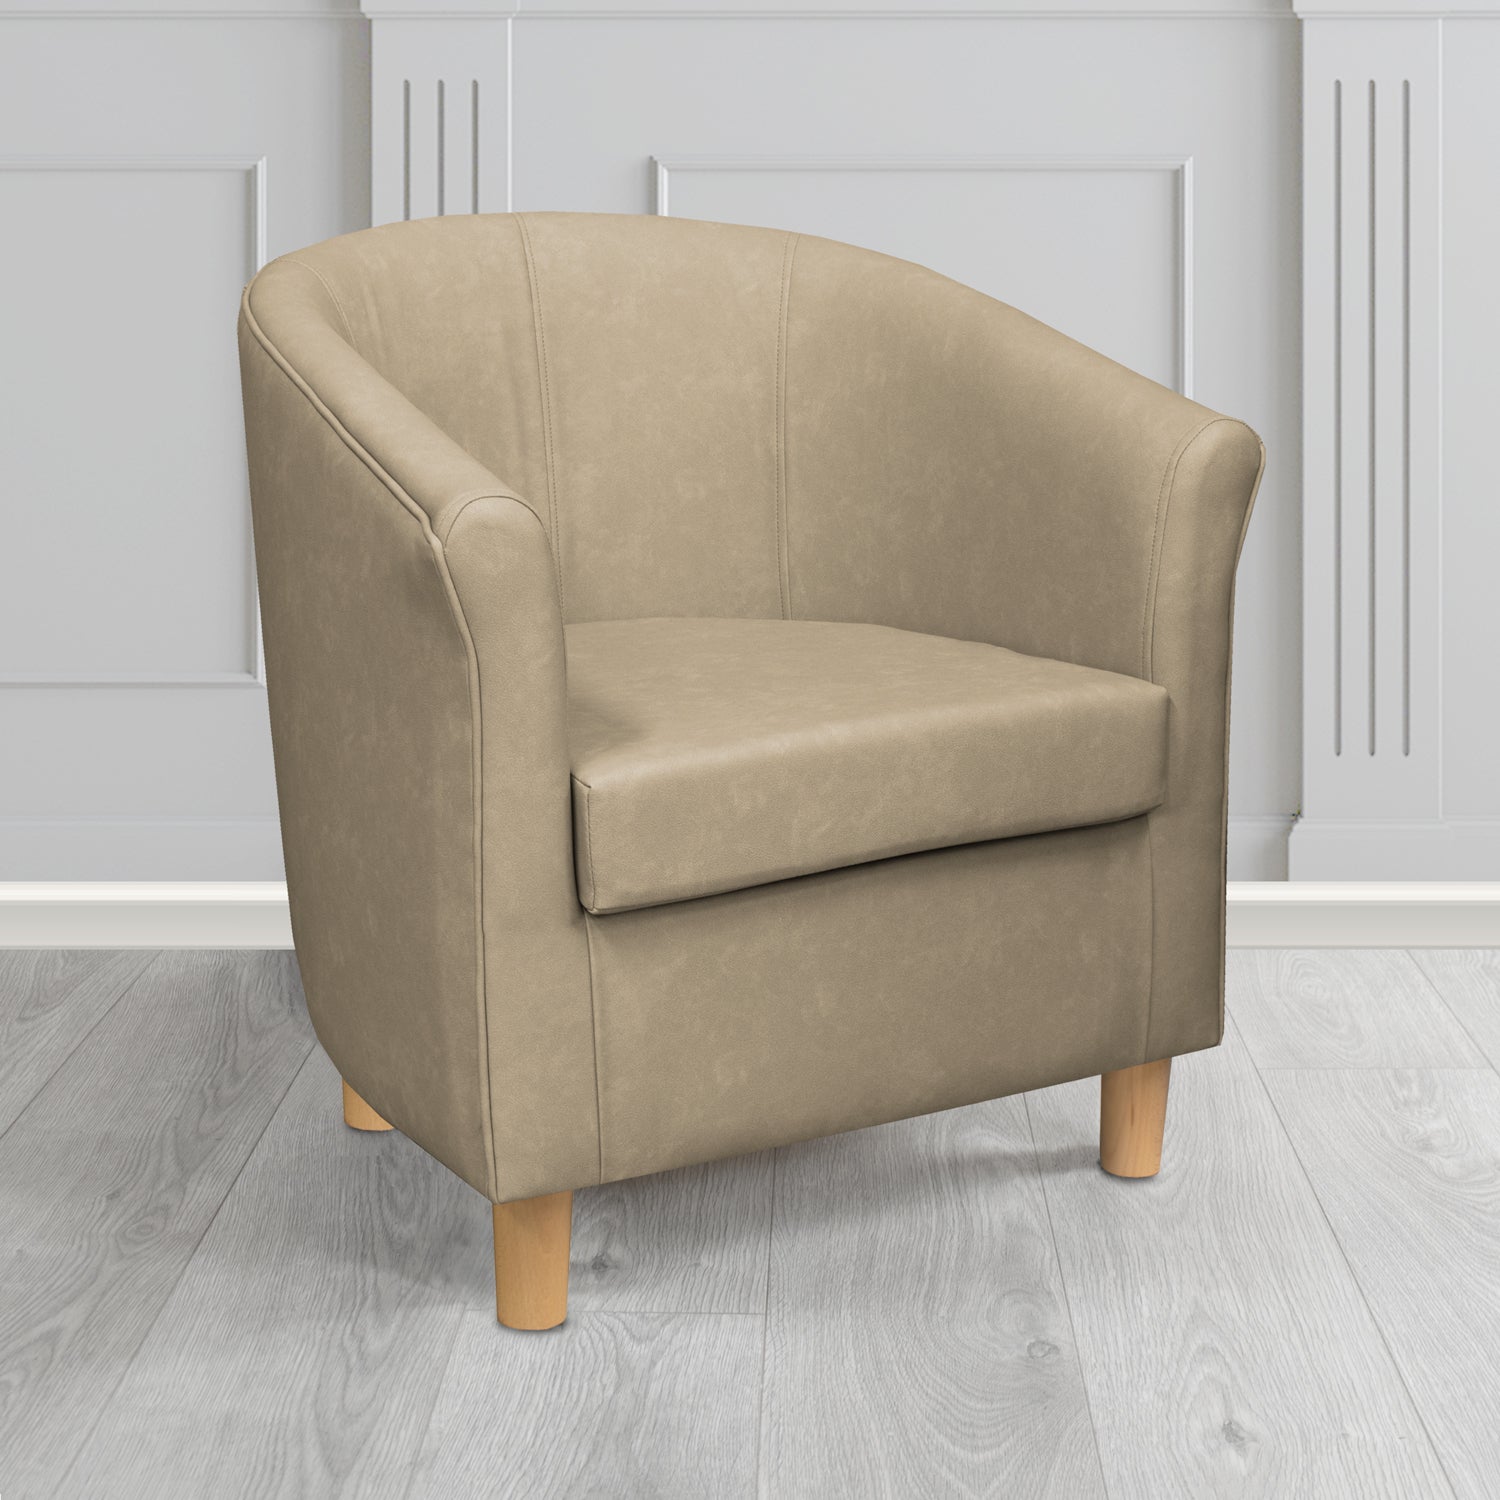 Tuscany Tub Chair in Infiniti Mousse INF1846 Antimicrobial Crib 5 Faux Leather - The Tub Chair Shop